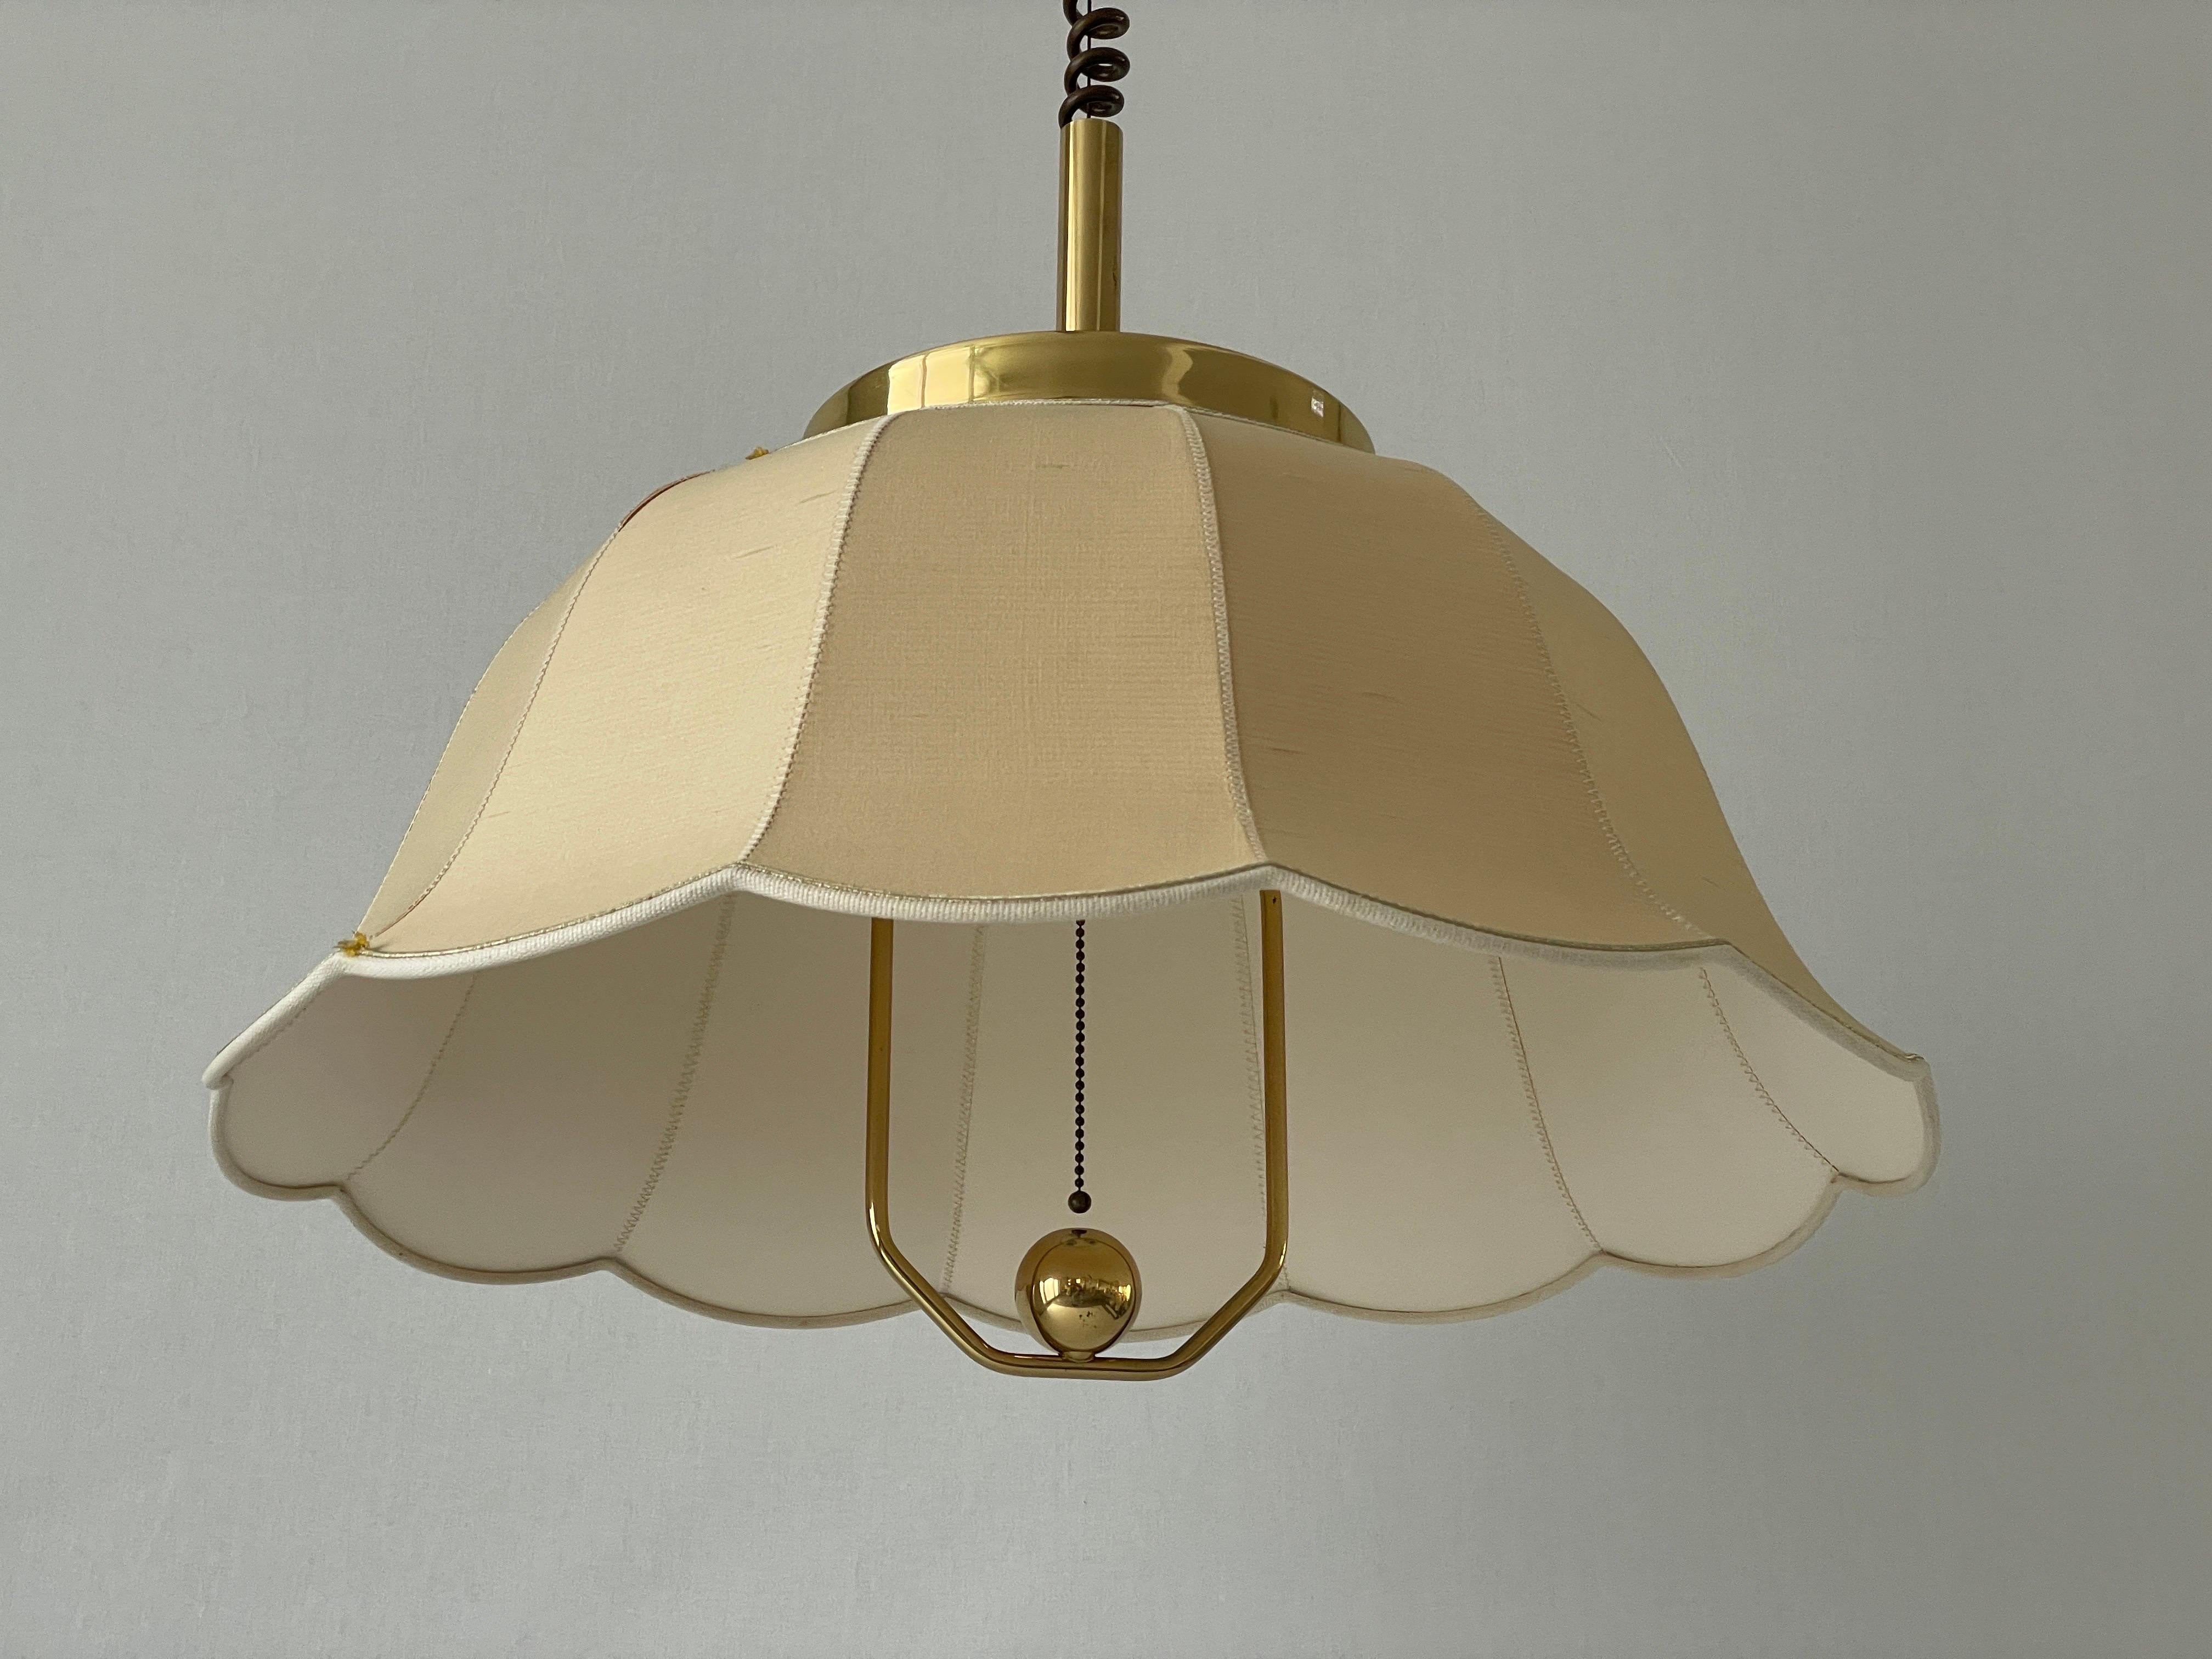 Beige Fabric and Brass 5 socket Adjustable Shade Mid-century Modern XL Pendant Lamp by WKR, 1970s, Germany

Adjustable large lampshade.

Brass body & fabric shade
Manufactured in Germany

Working Principle:
When you pull the thread, first you light